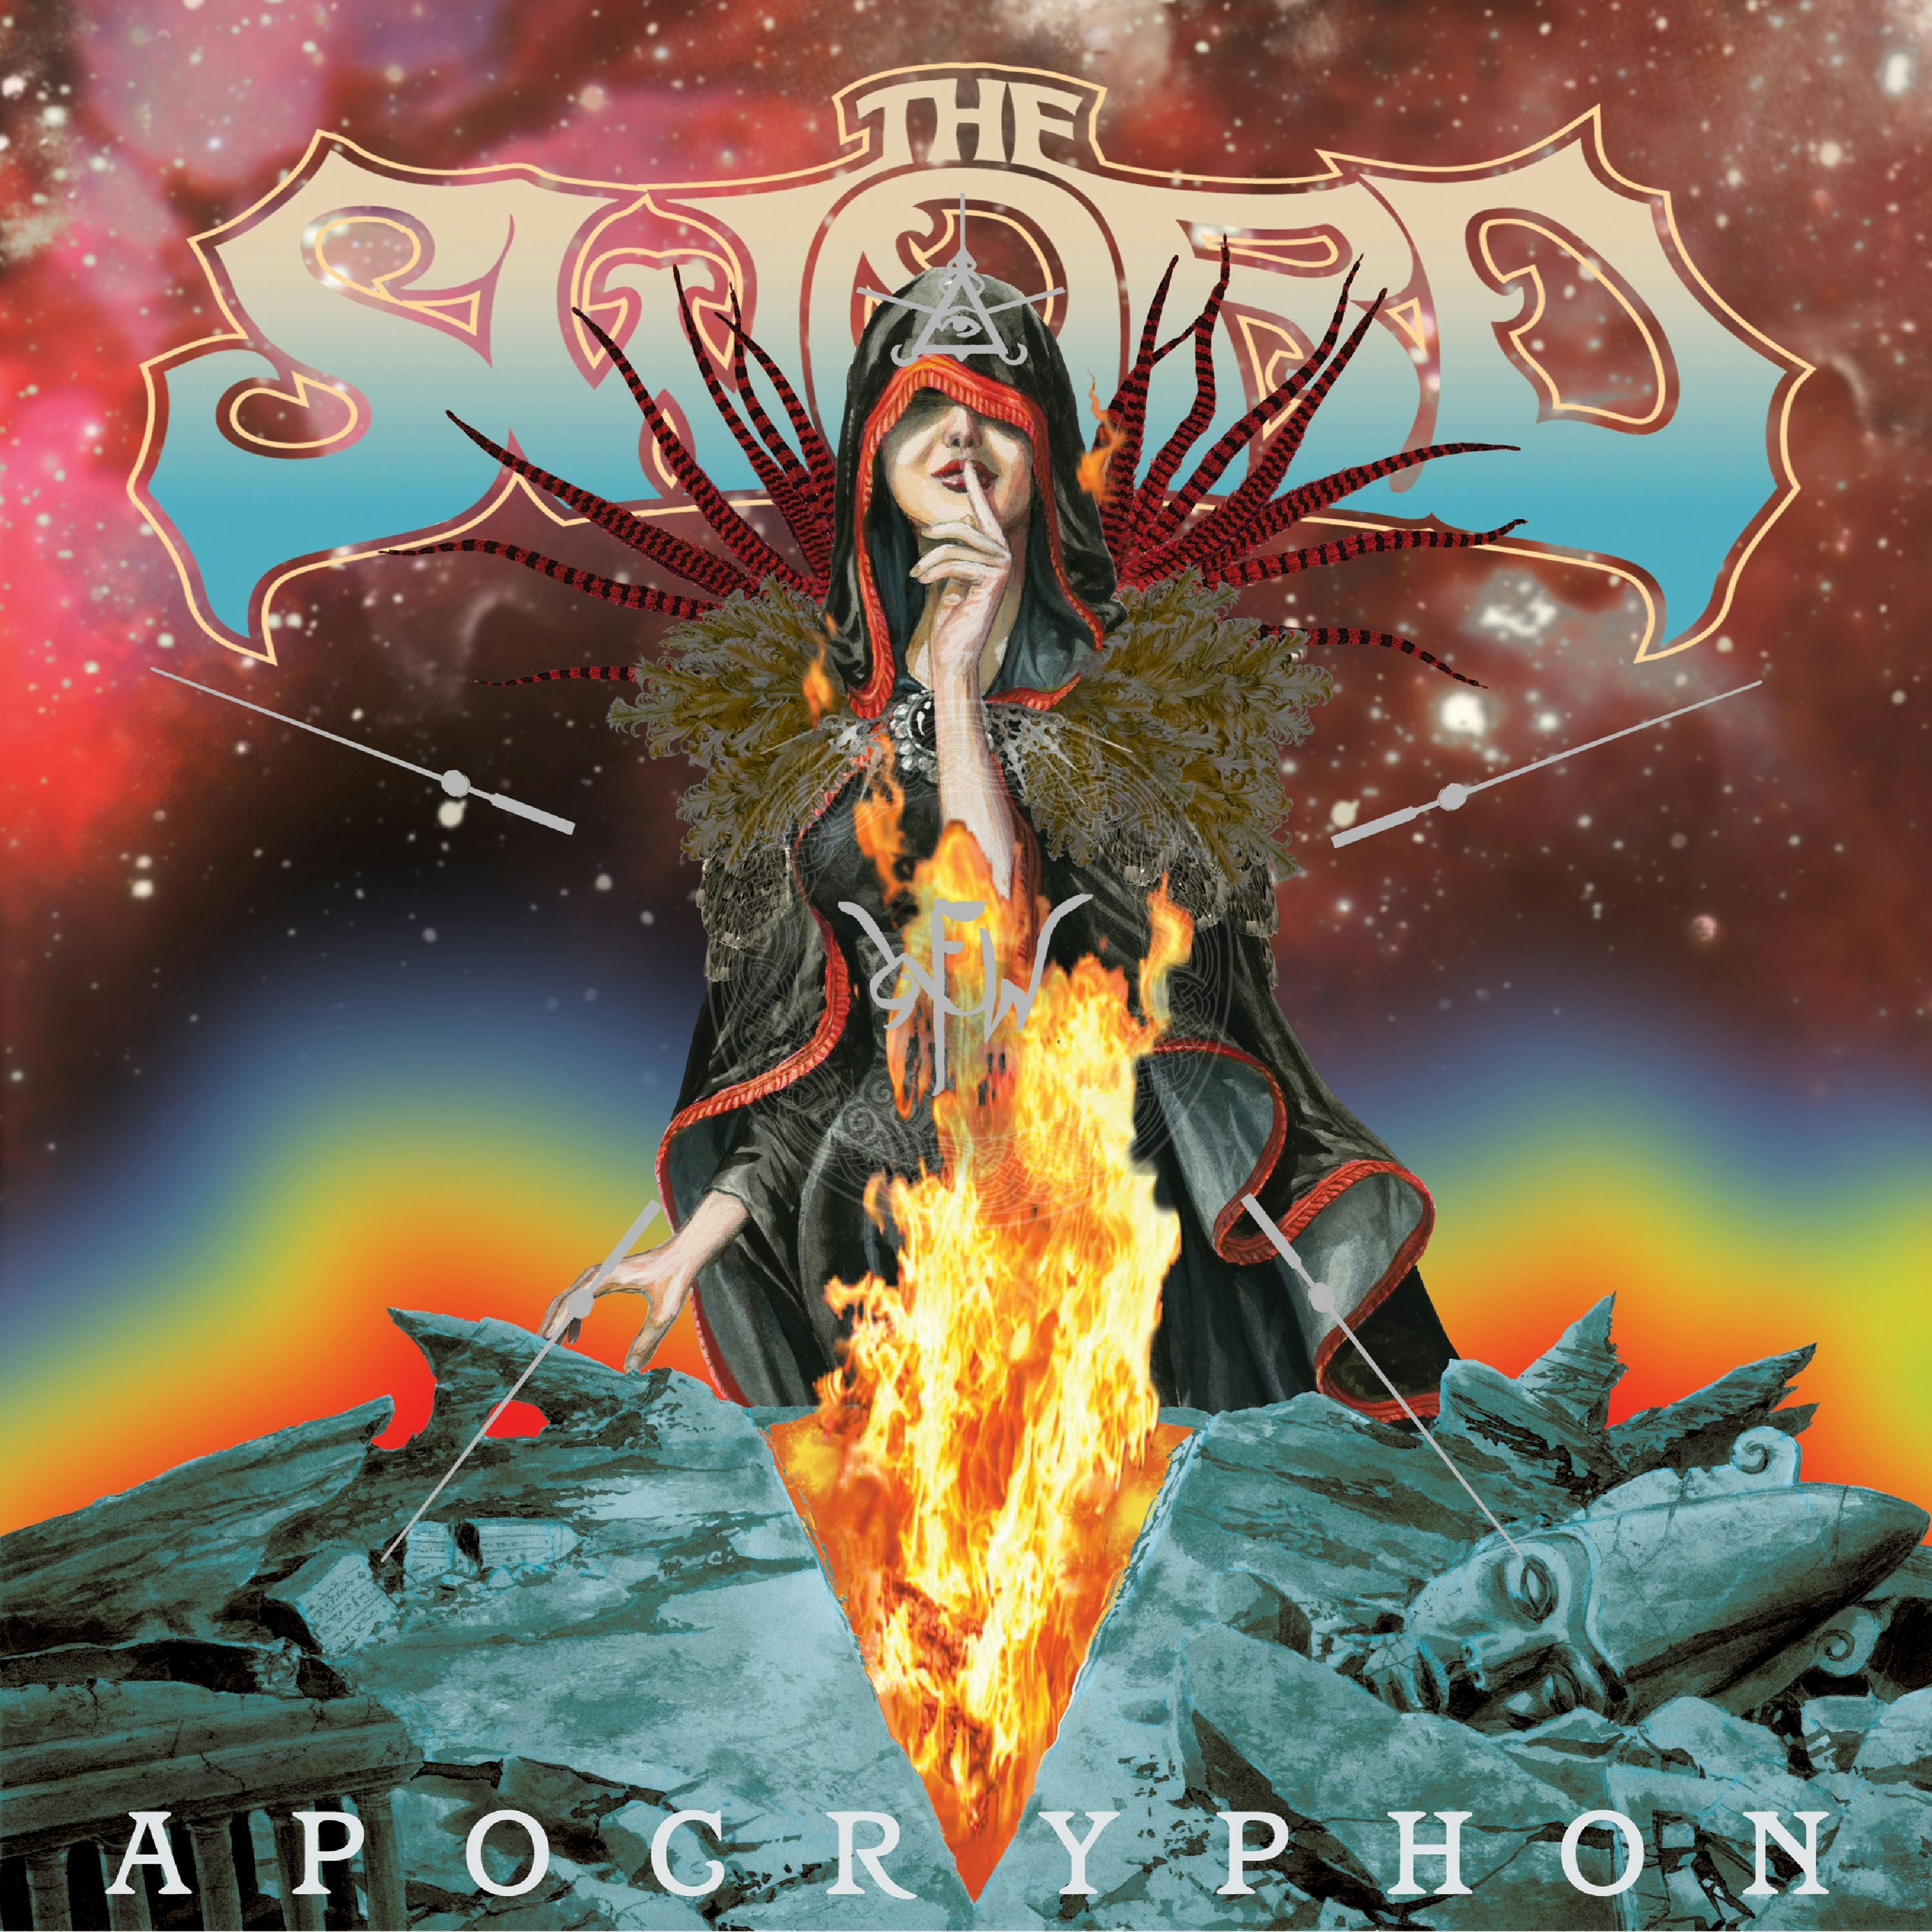 Album artwork for Album artwork for Apocryphon (10th Anniversary Edition) by The Sword by Apocryphon (10th Anniversary Edition) - The Sword